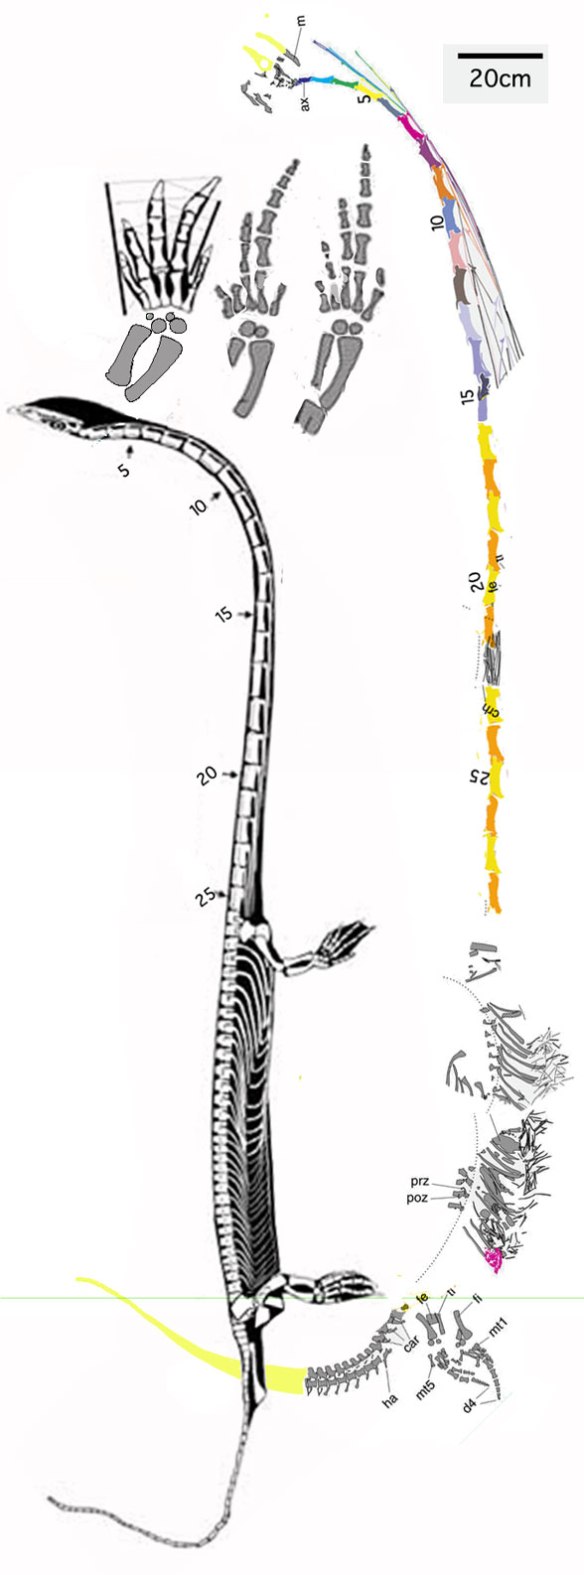 Figure 1. The new Dinocephalosaurus has traits the holotype does not, like a longer neck with more vertebrae, a robust tail with deep chevrons and a distinct foot morphology with an elongate pedal digit 4.